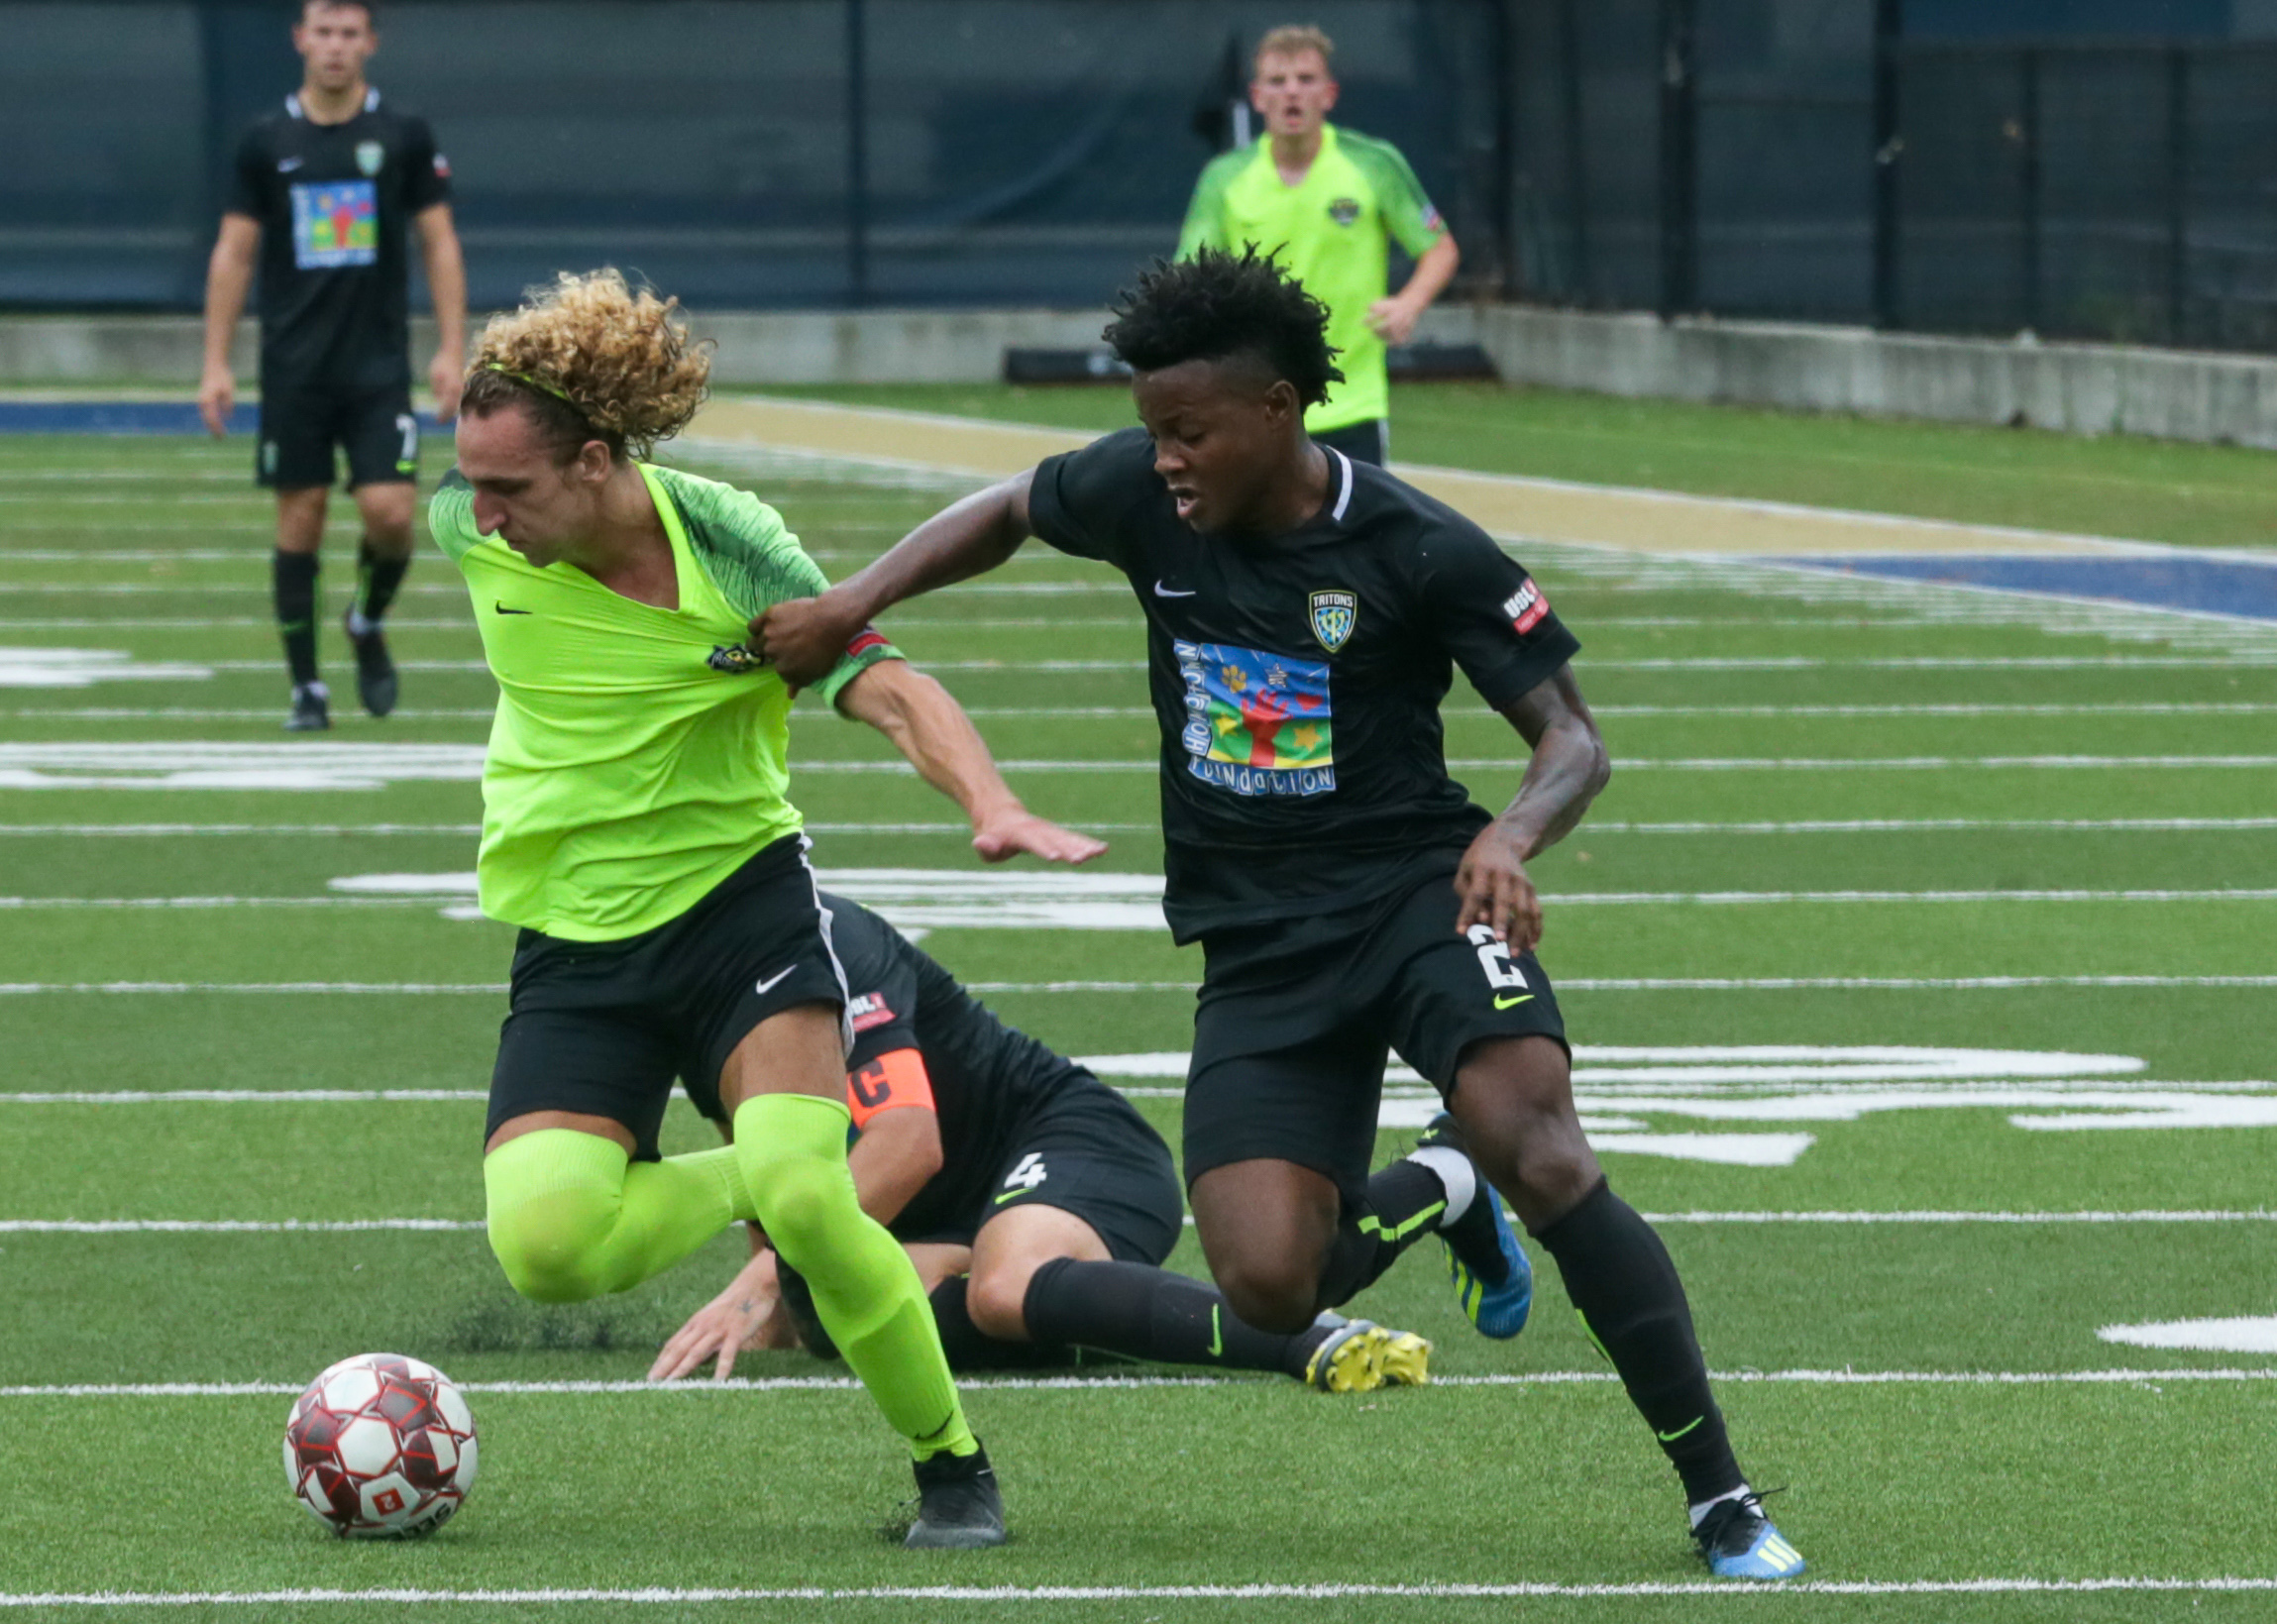 Photos Florida Elite finishes first USL League Two campaign Official